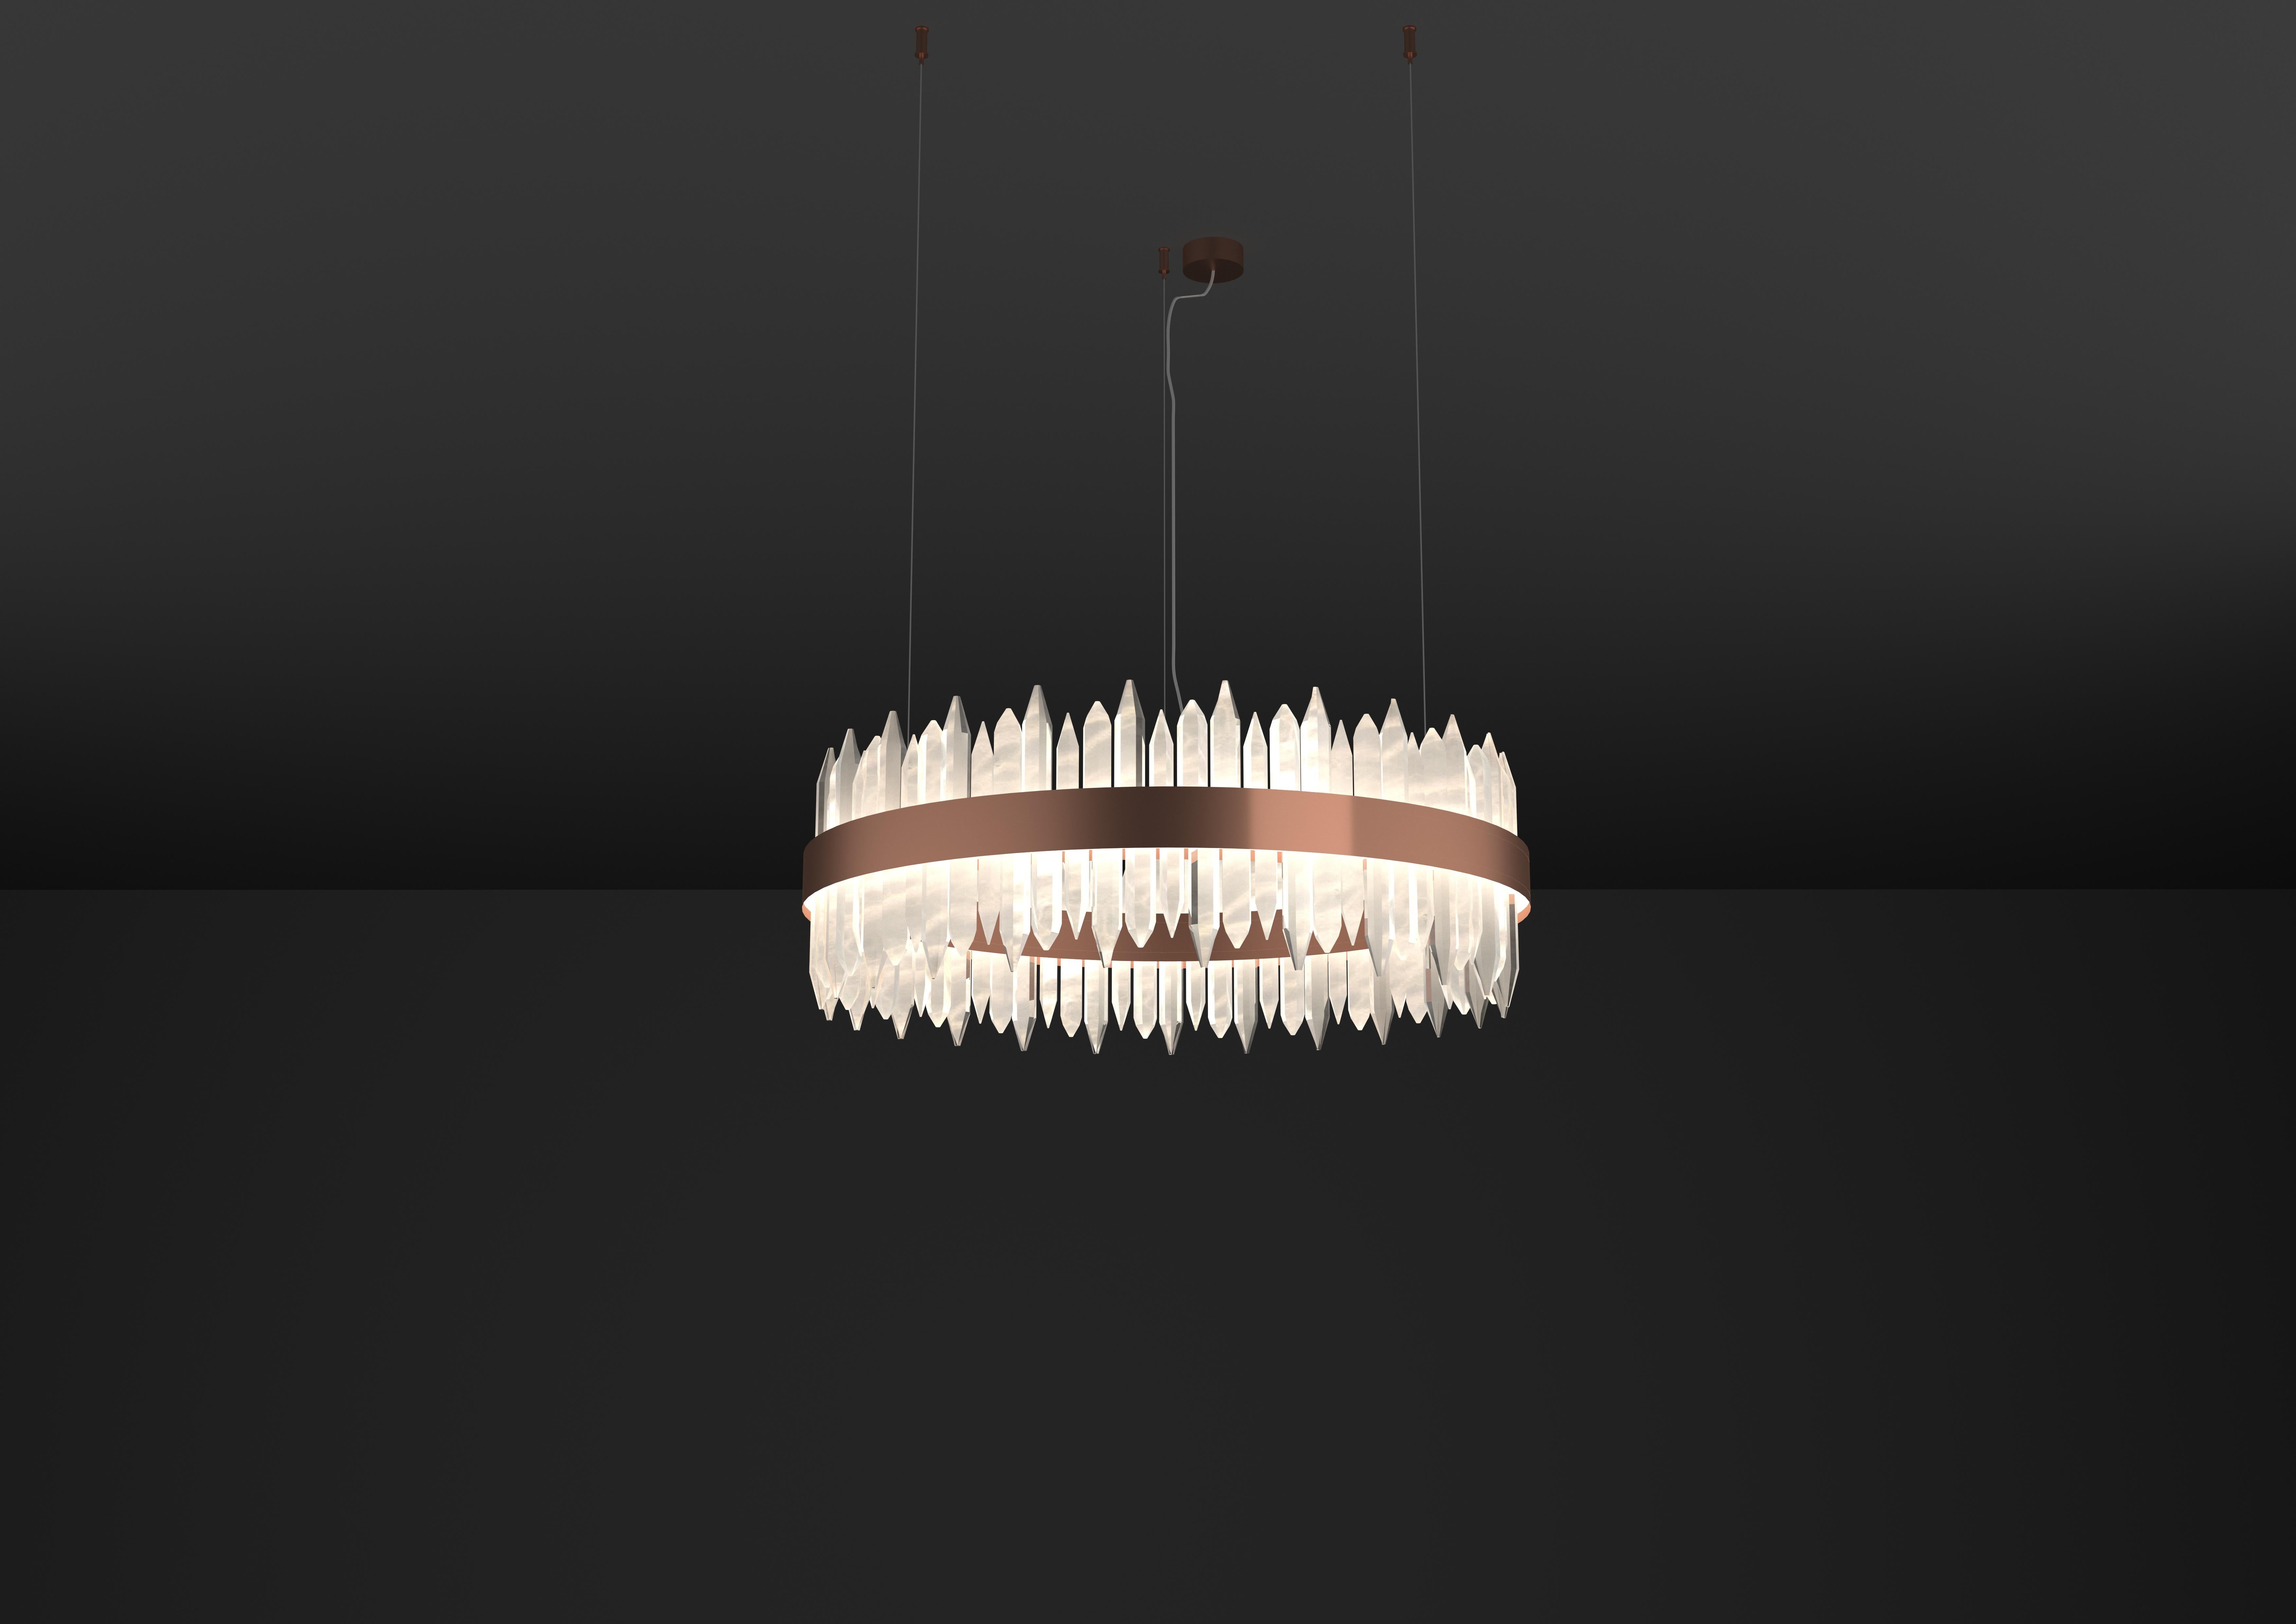 Urano Copper 80 Pendant Light 2 by Alabastro Italiano
Dimensions: Ø 80 x H 34 cm.
Materials: Glass and copper.

2 x Strip LED, 108 Watt 10843 Lumen, 24 V, 3000 K

Available in different sizes: Ø 60, Ø 80, Ø 100 and Ø 120 cm. 
Available in